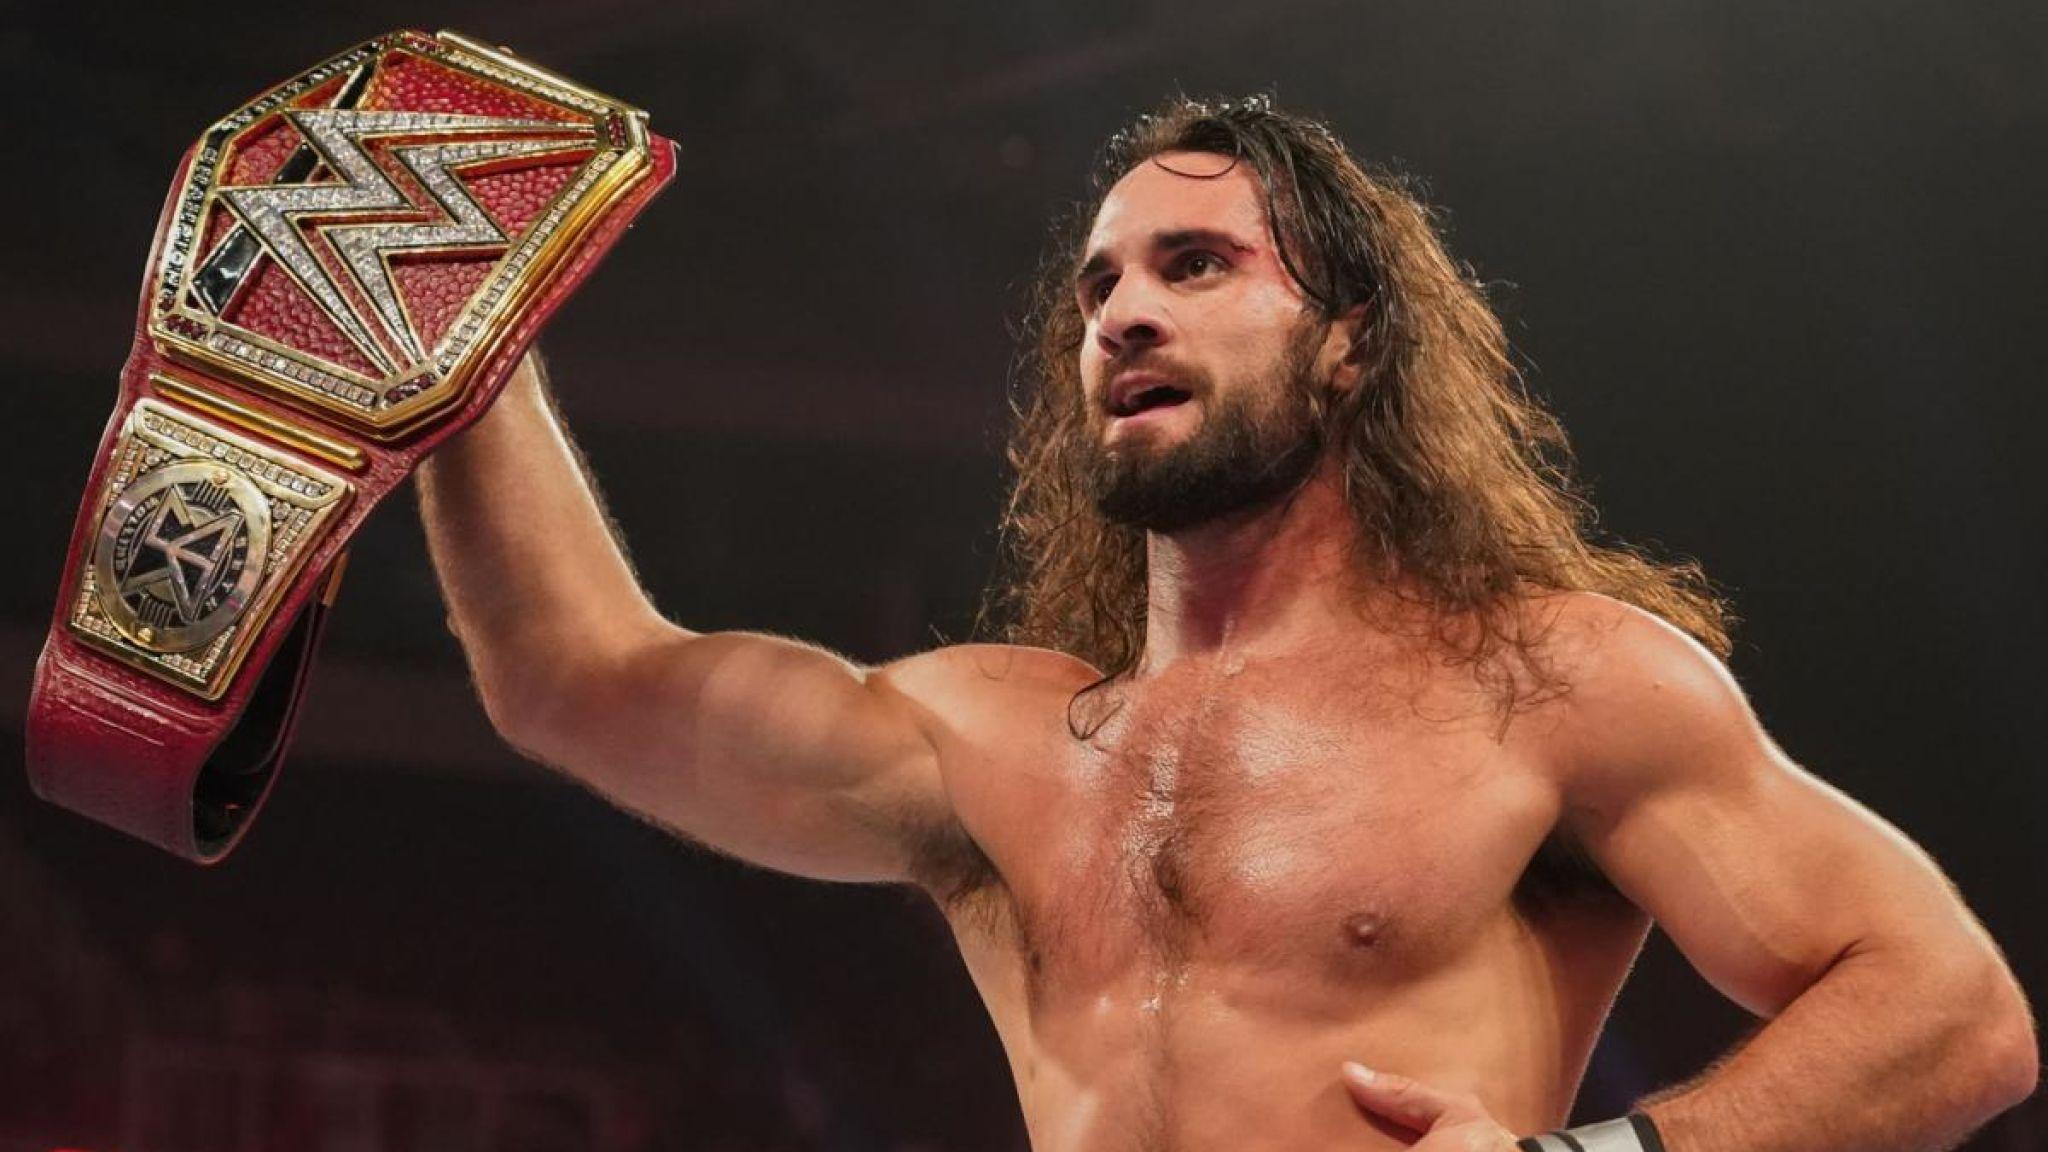 WWE Raw: Seth Rollins to defend Universal title against